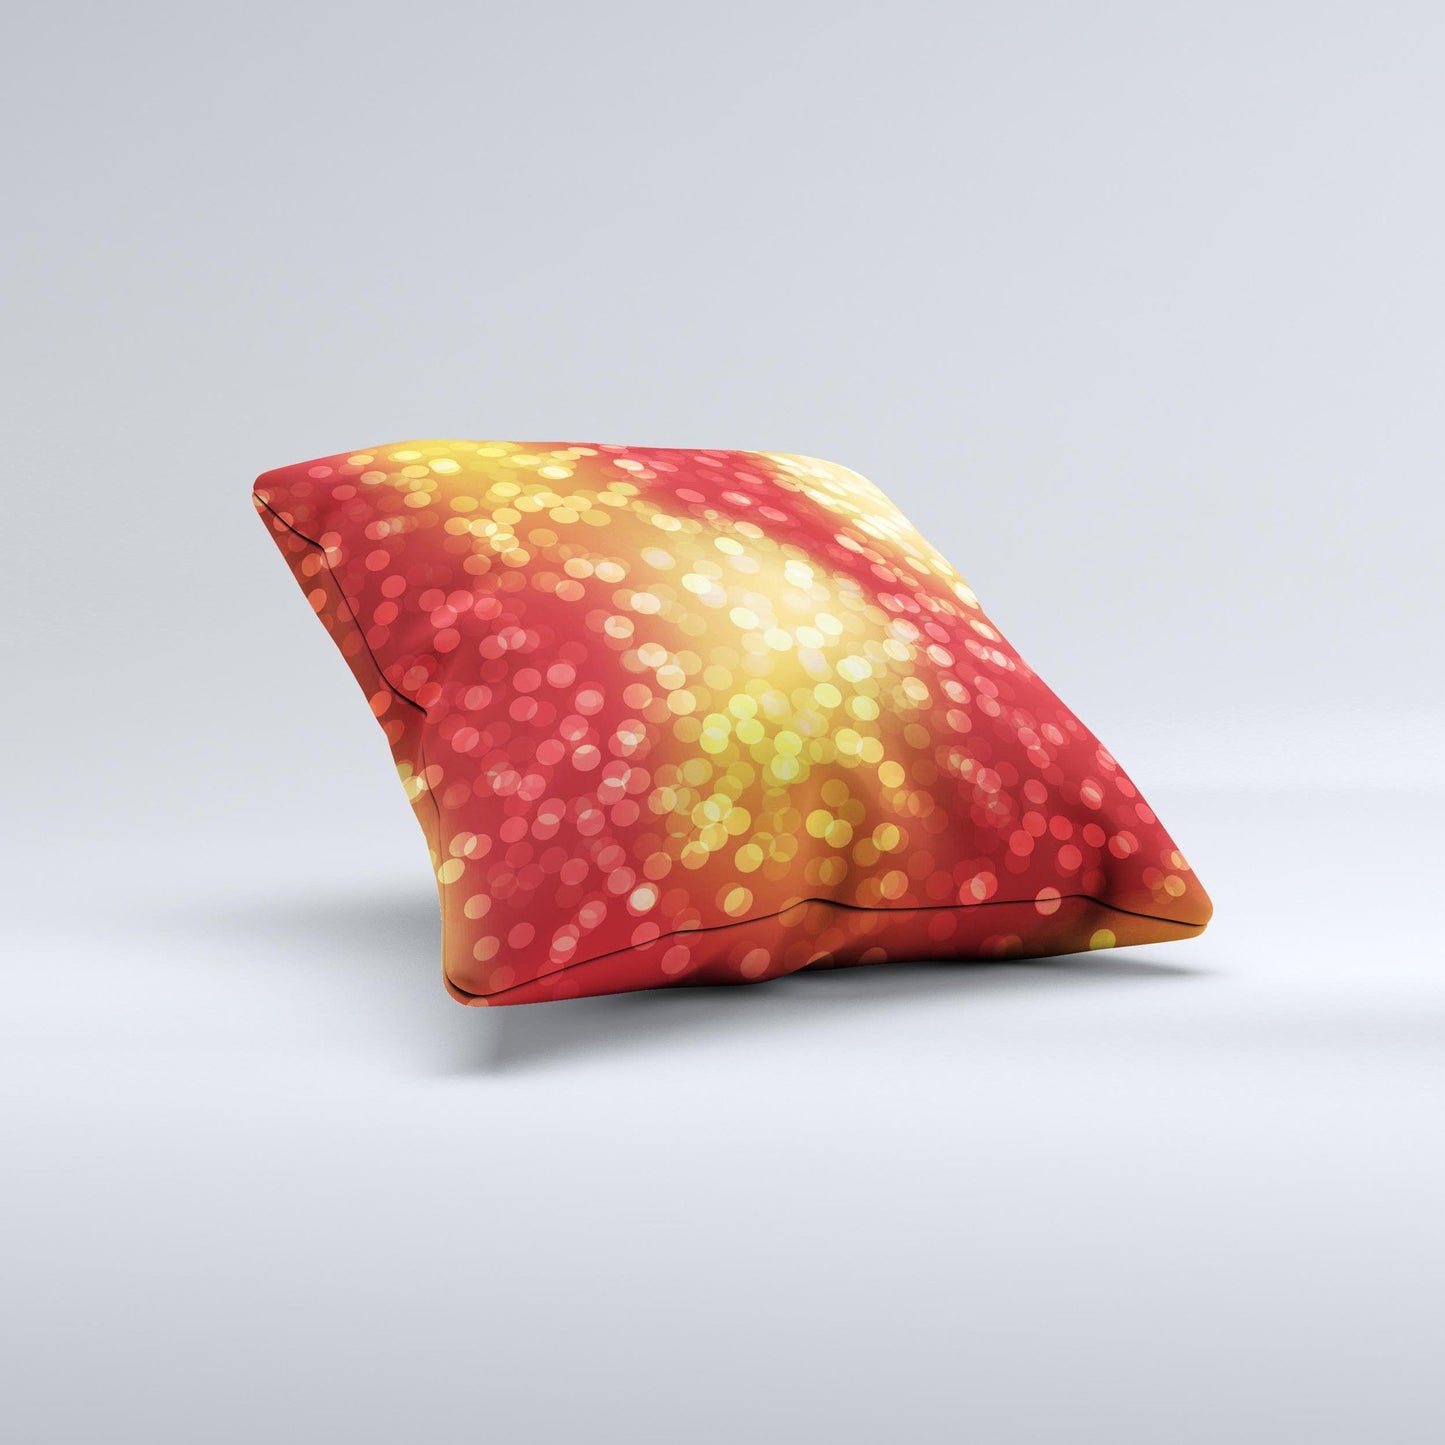 Red and Yellow Glistening Orbs ink-Fuzed Decorative Throw Pillow